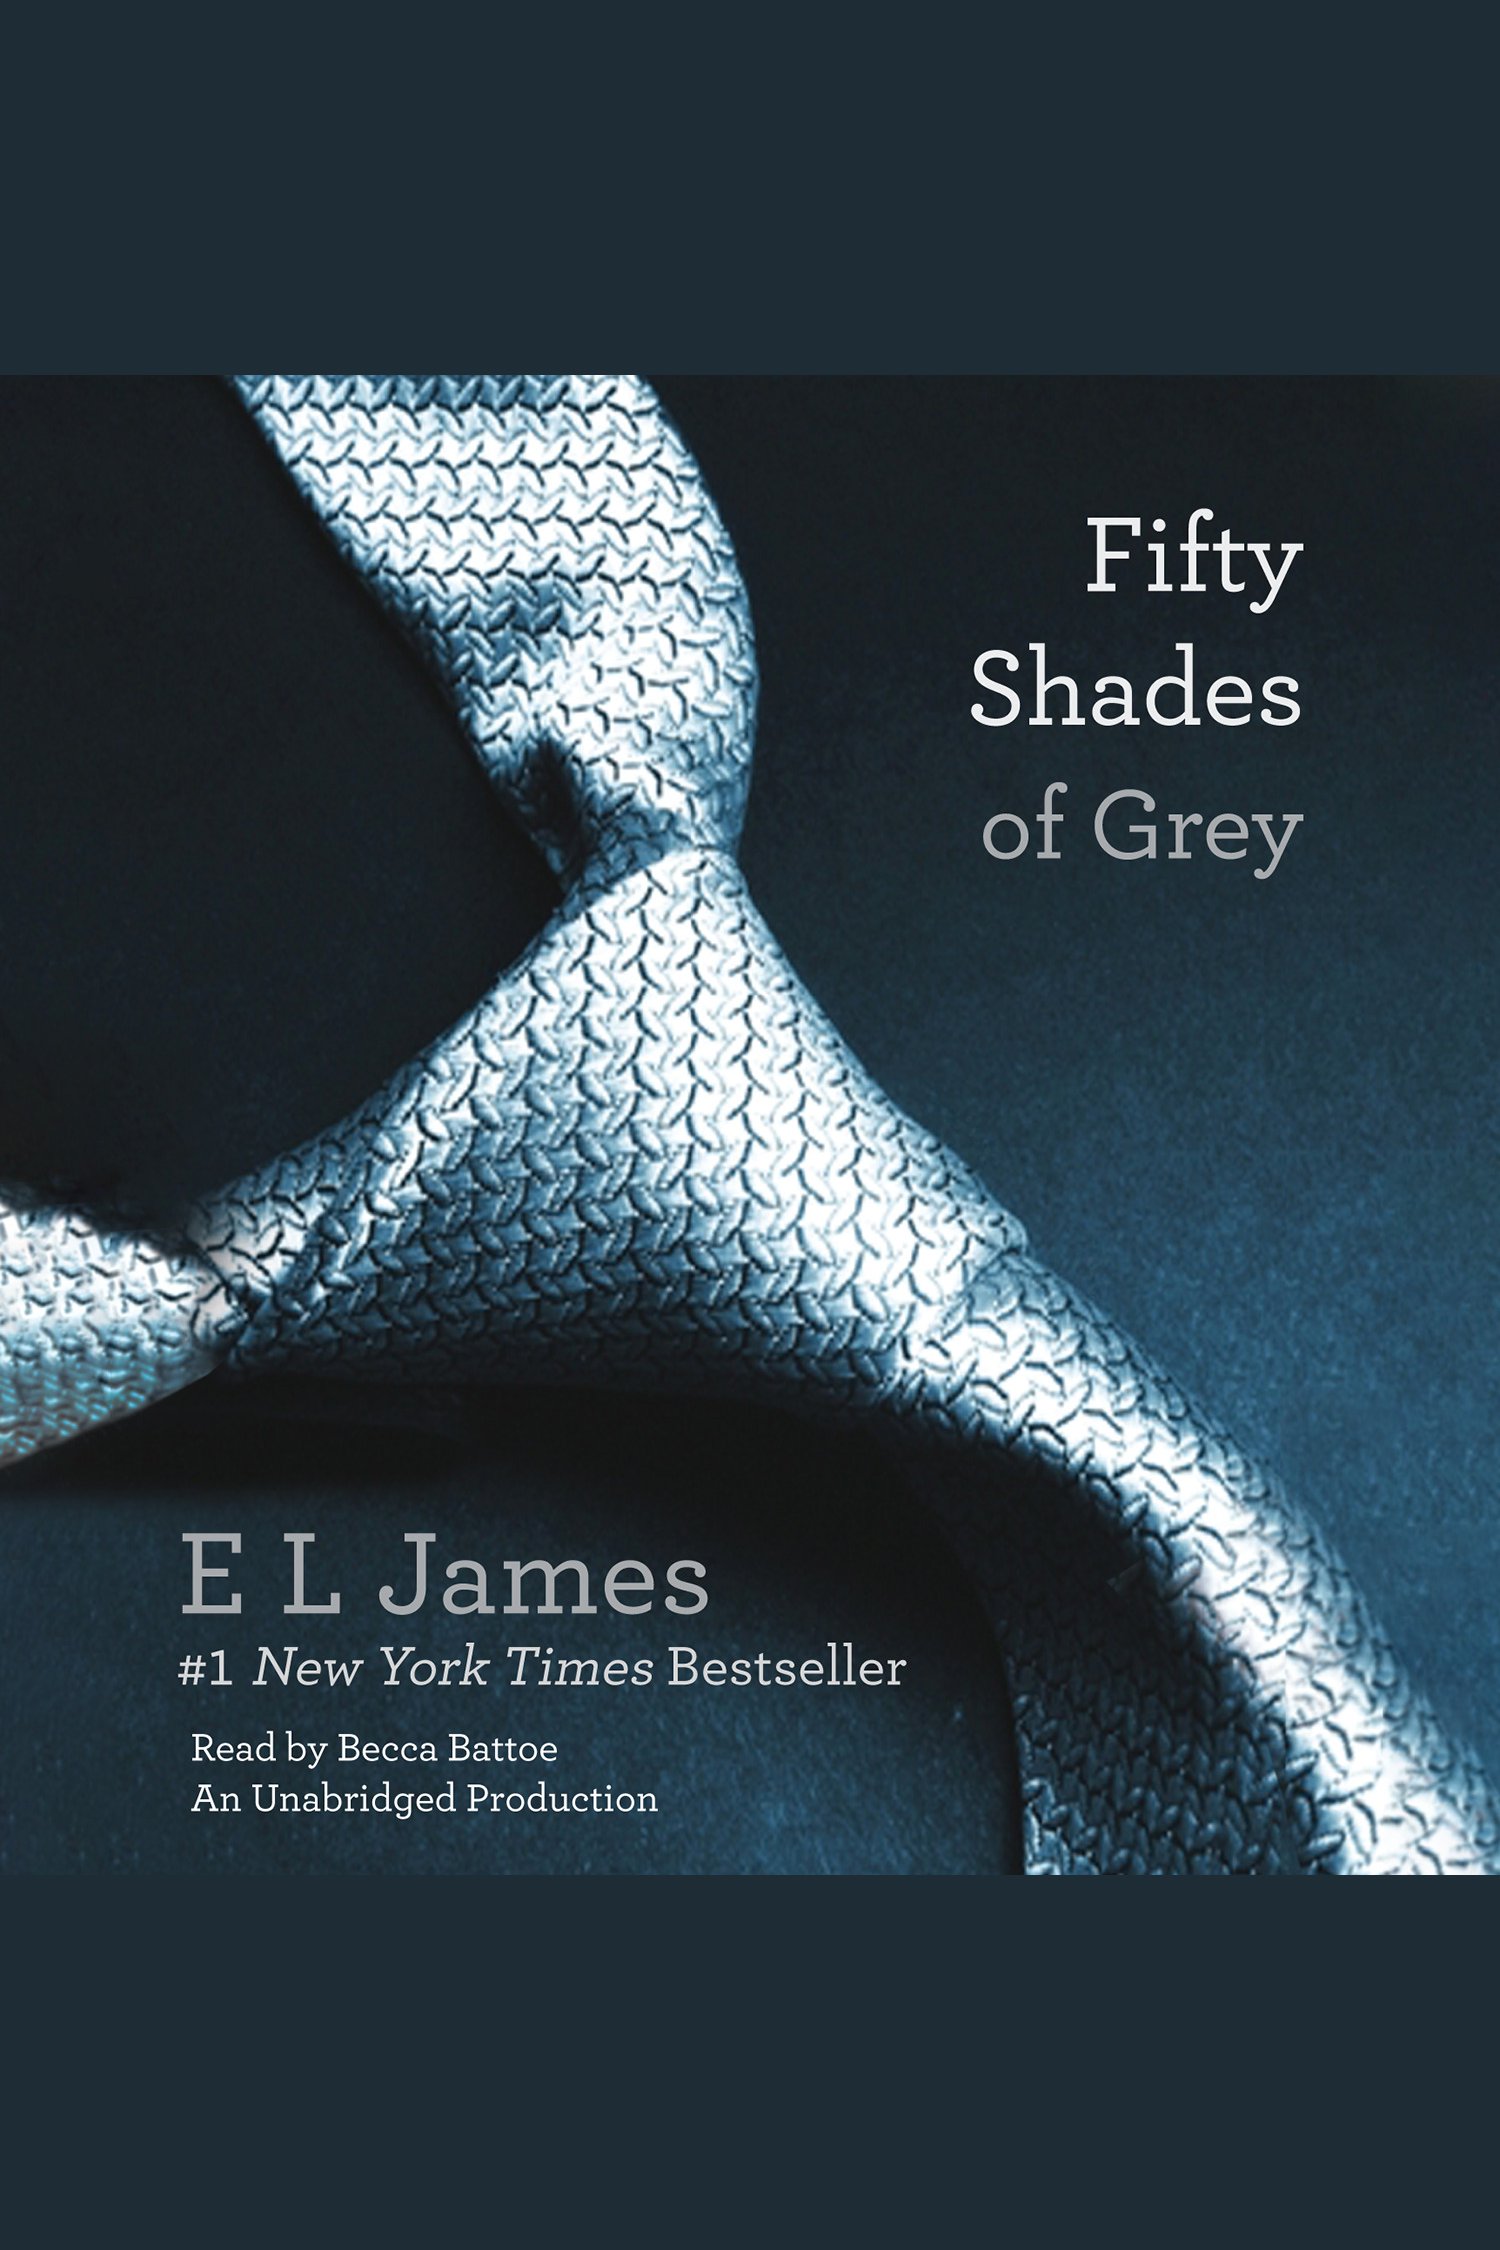 Fifty shades of Grey cover image